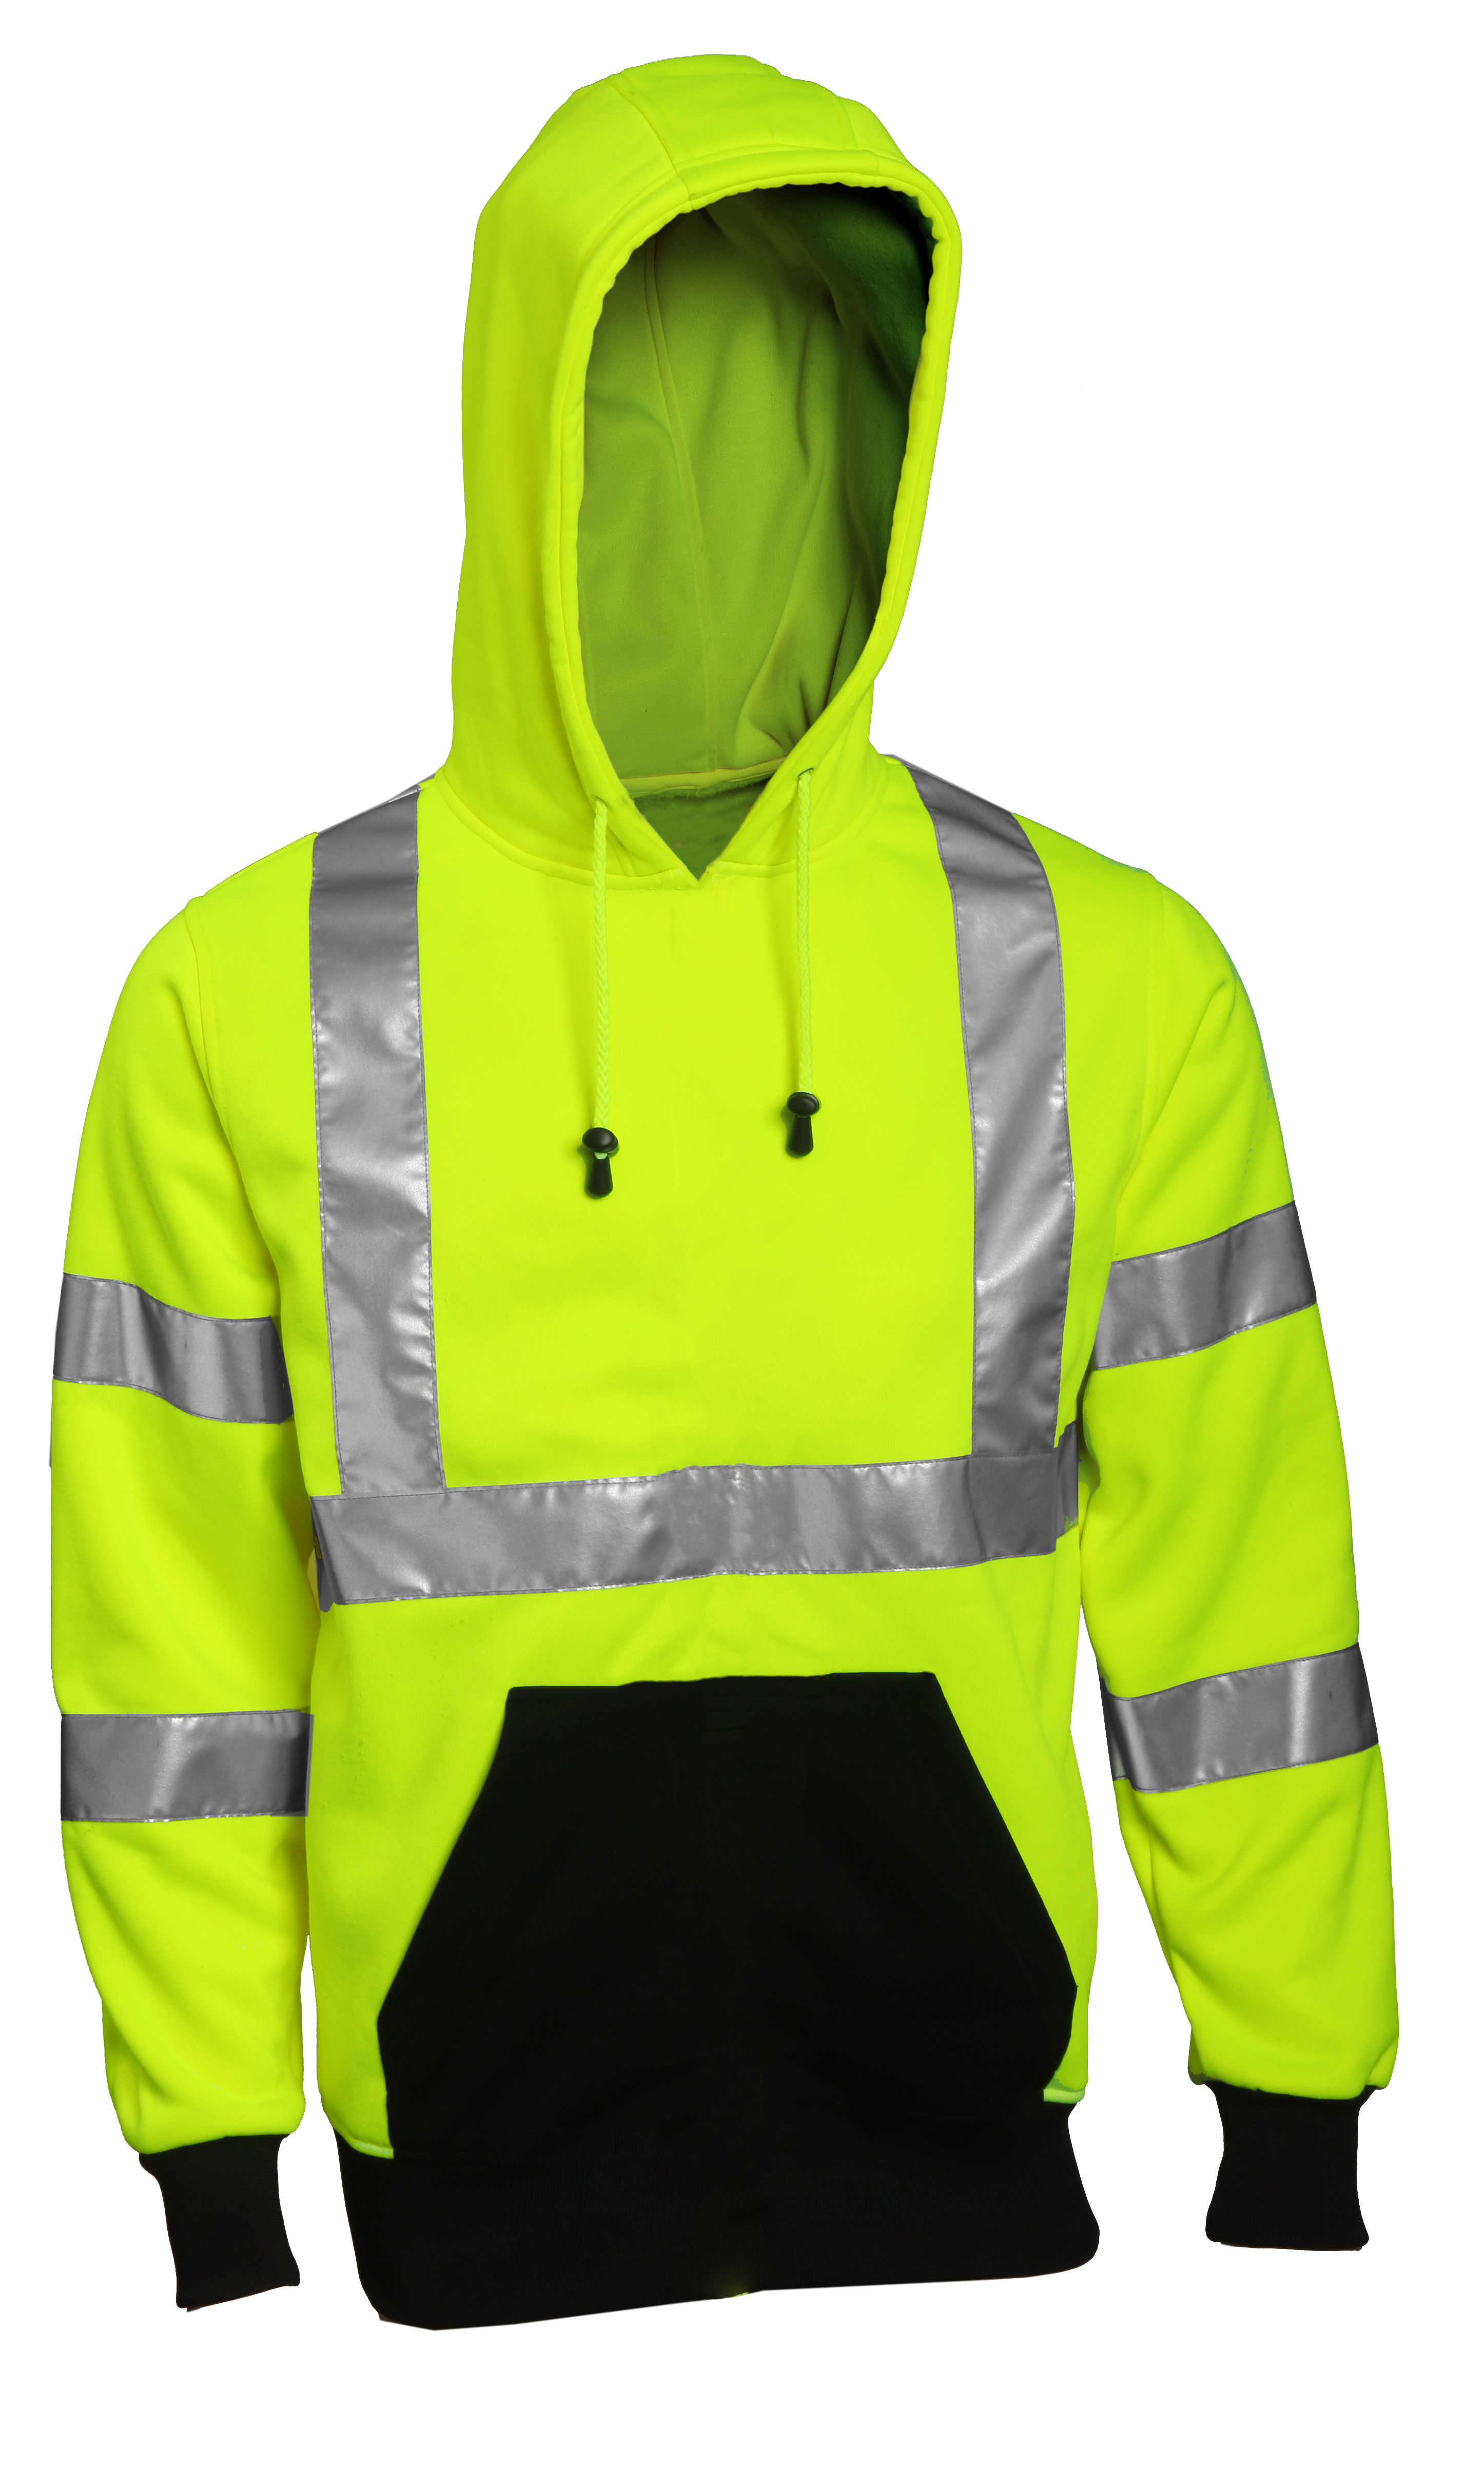 Type R Class 3 Sweatshirt - Fluorescent Yellow-Green - Hooded -1 Pouch Pocket - Silver Reflective Tape-eSafety Supplies, Inc